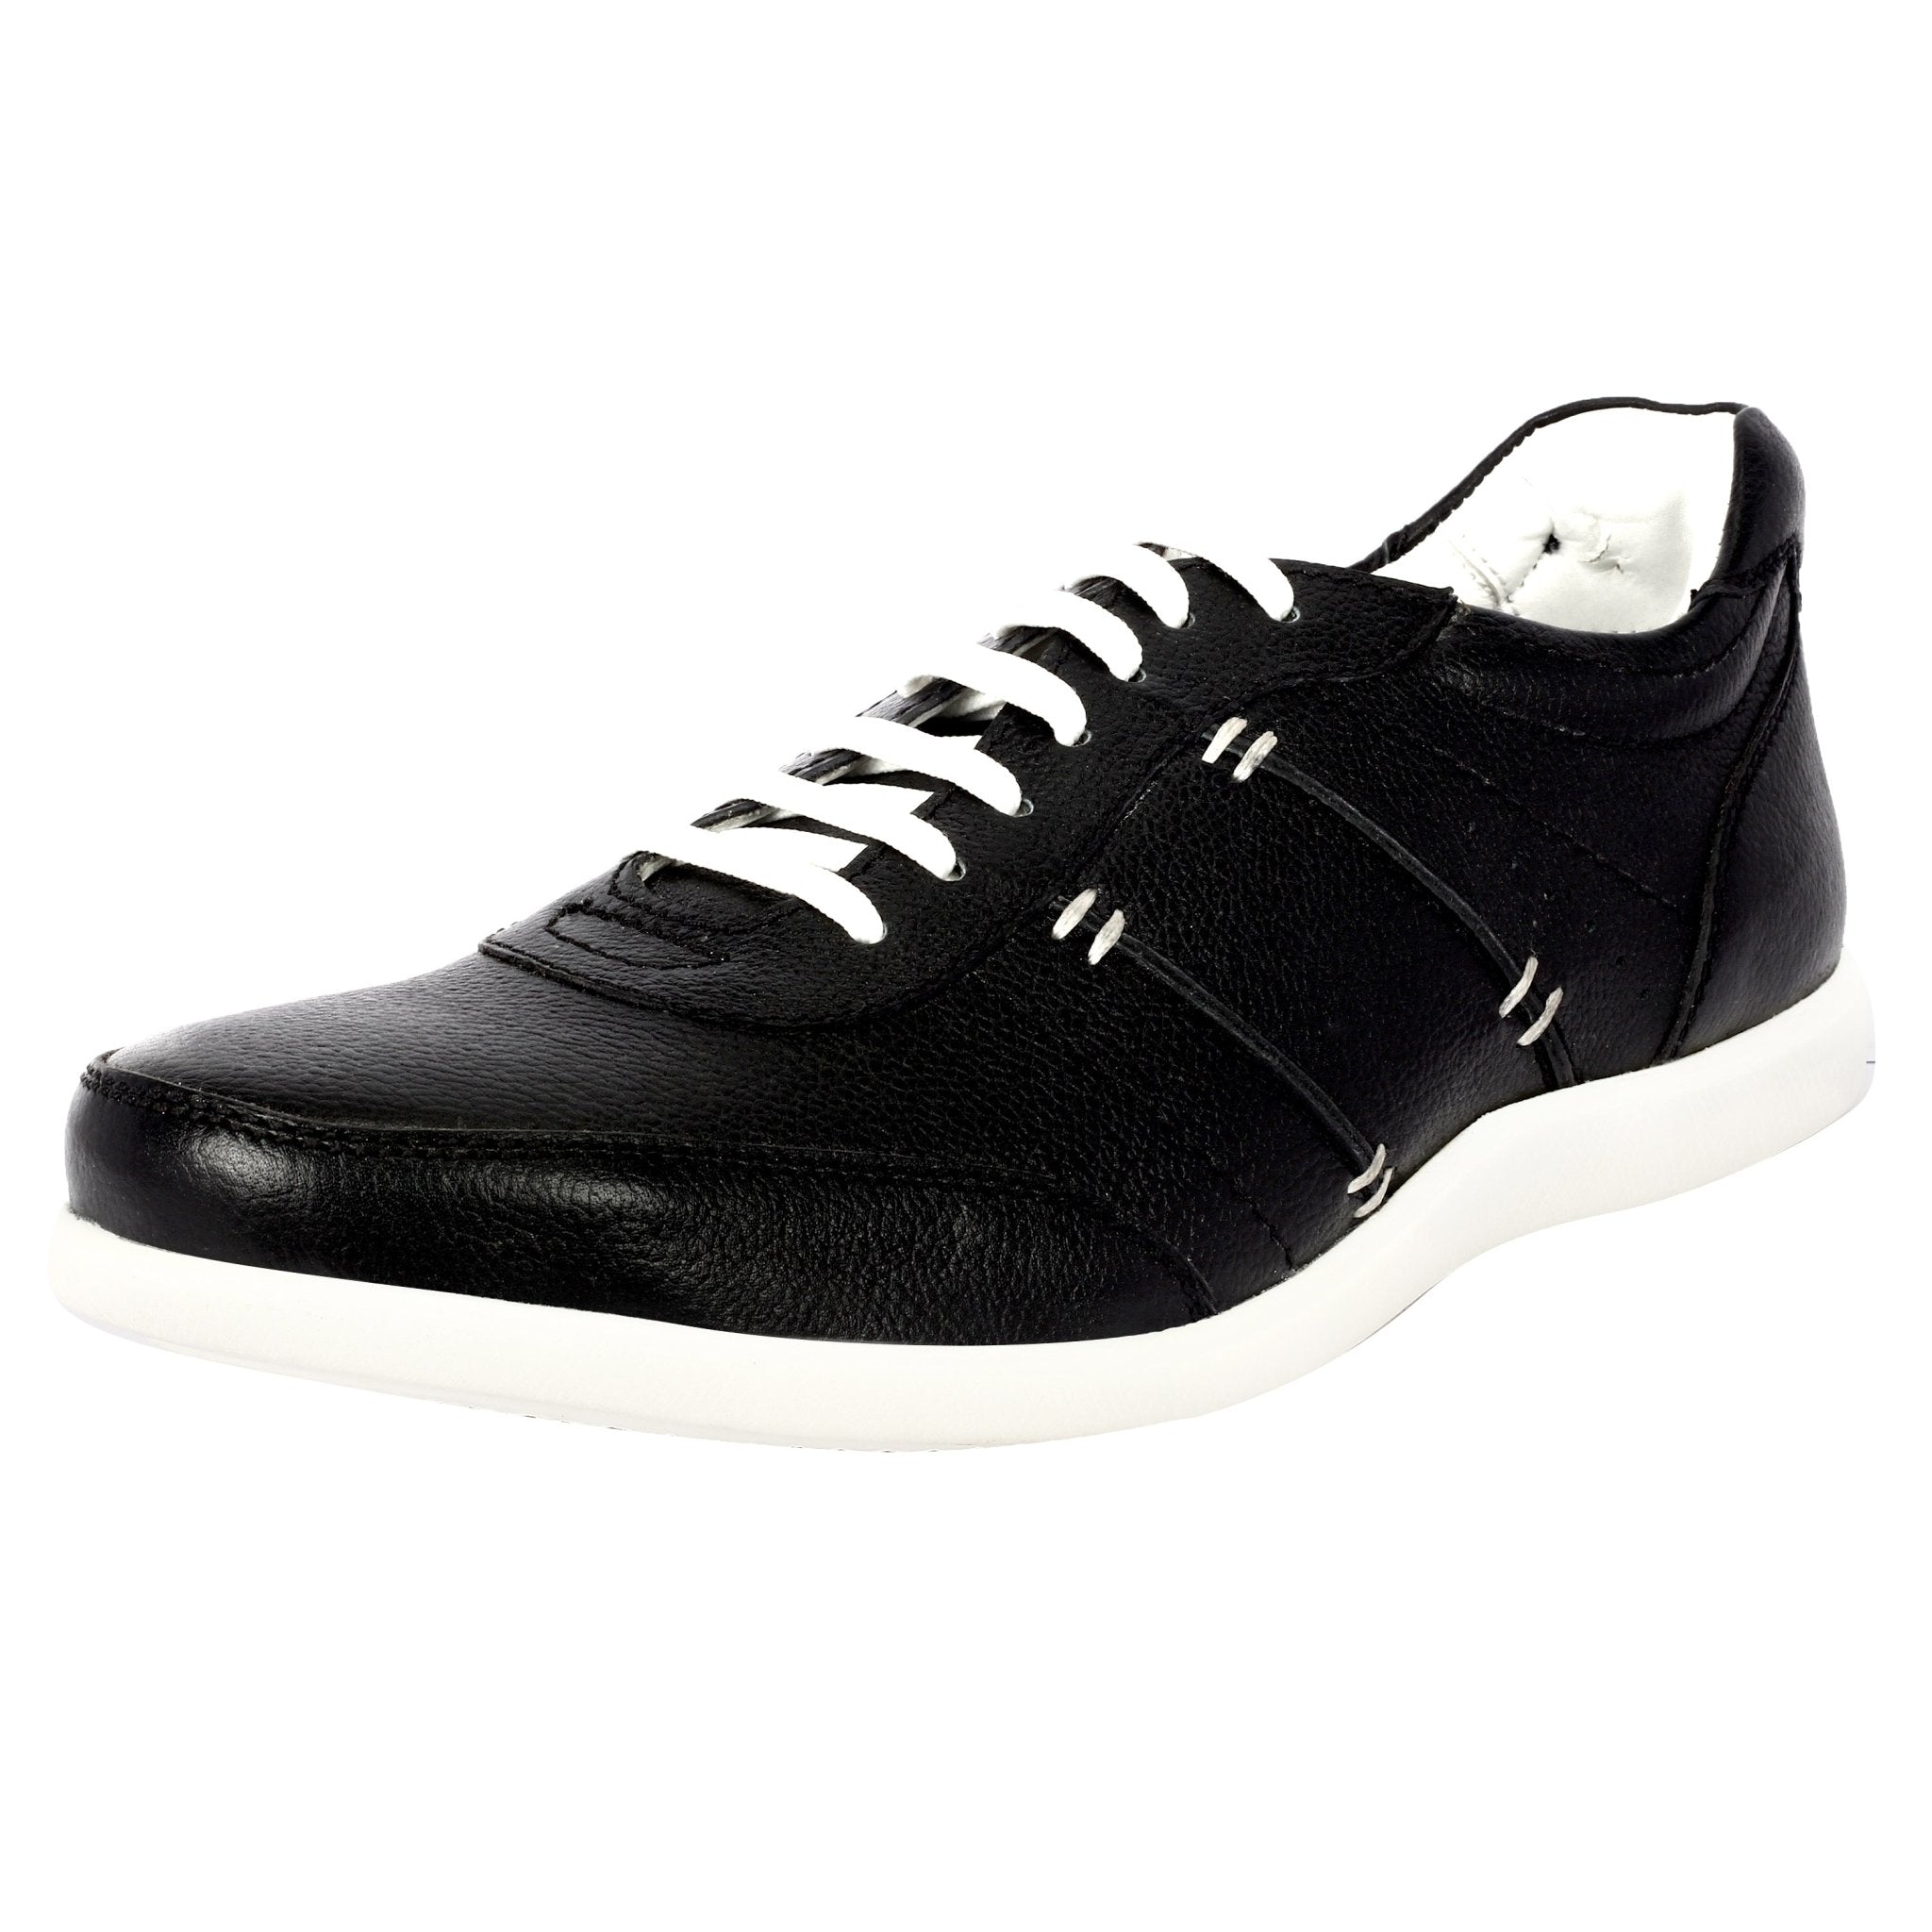 Snapper Leather Casual Sneaker for Men